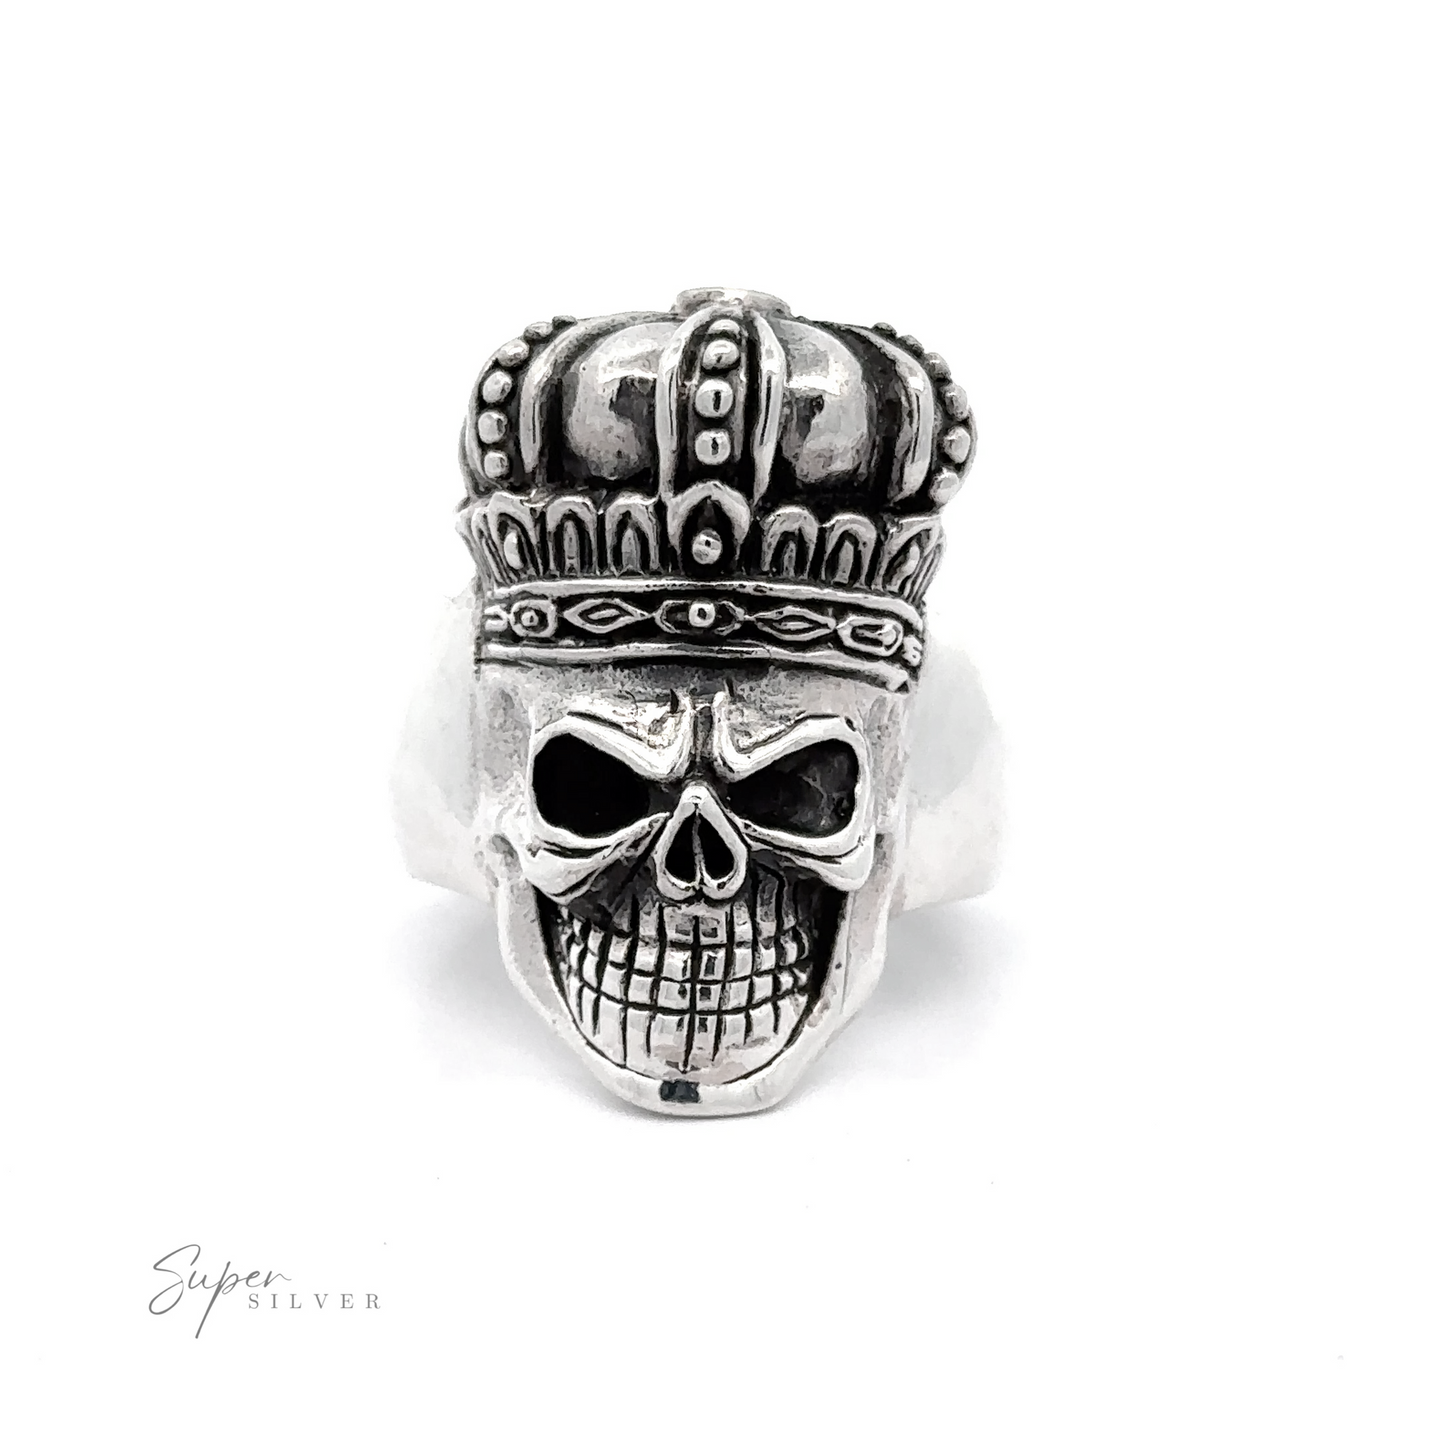 Skull King Ring adorned with a detailed king's crown.